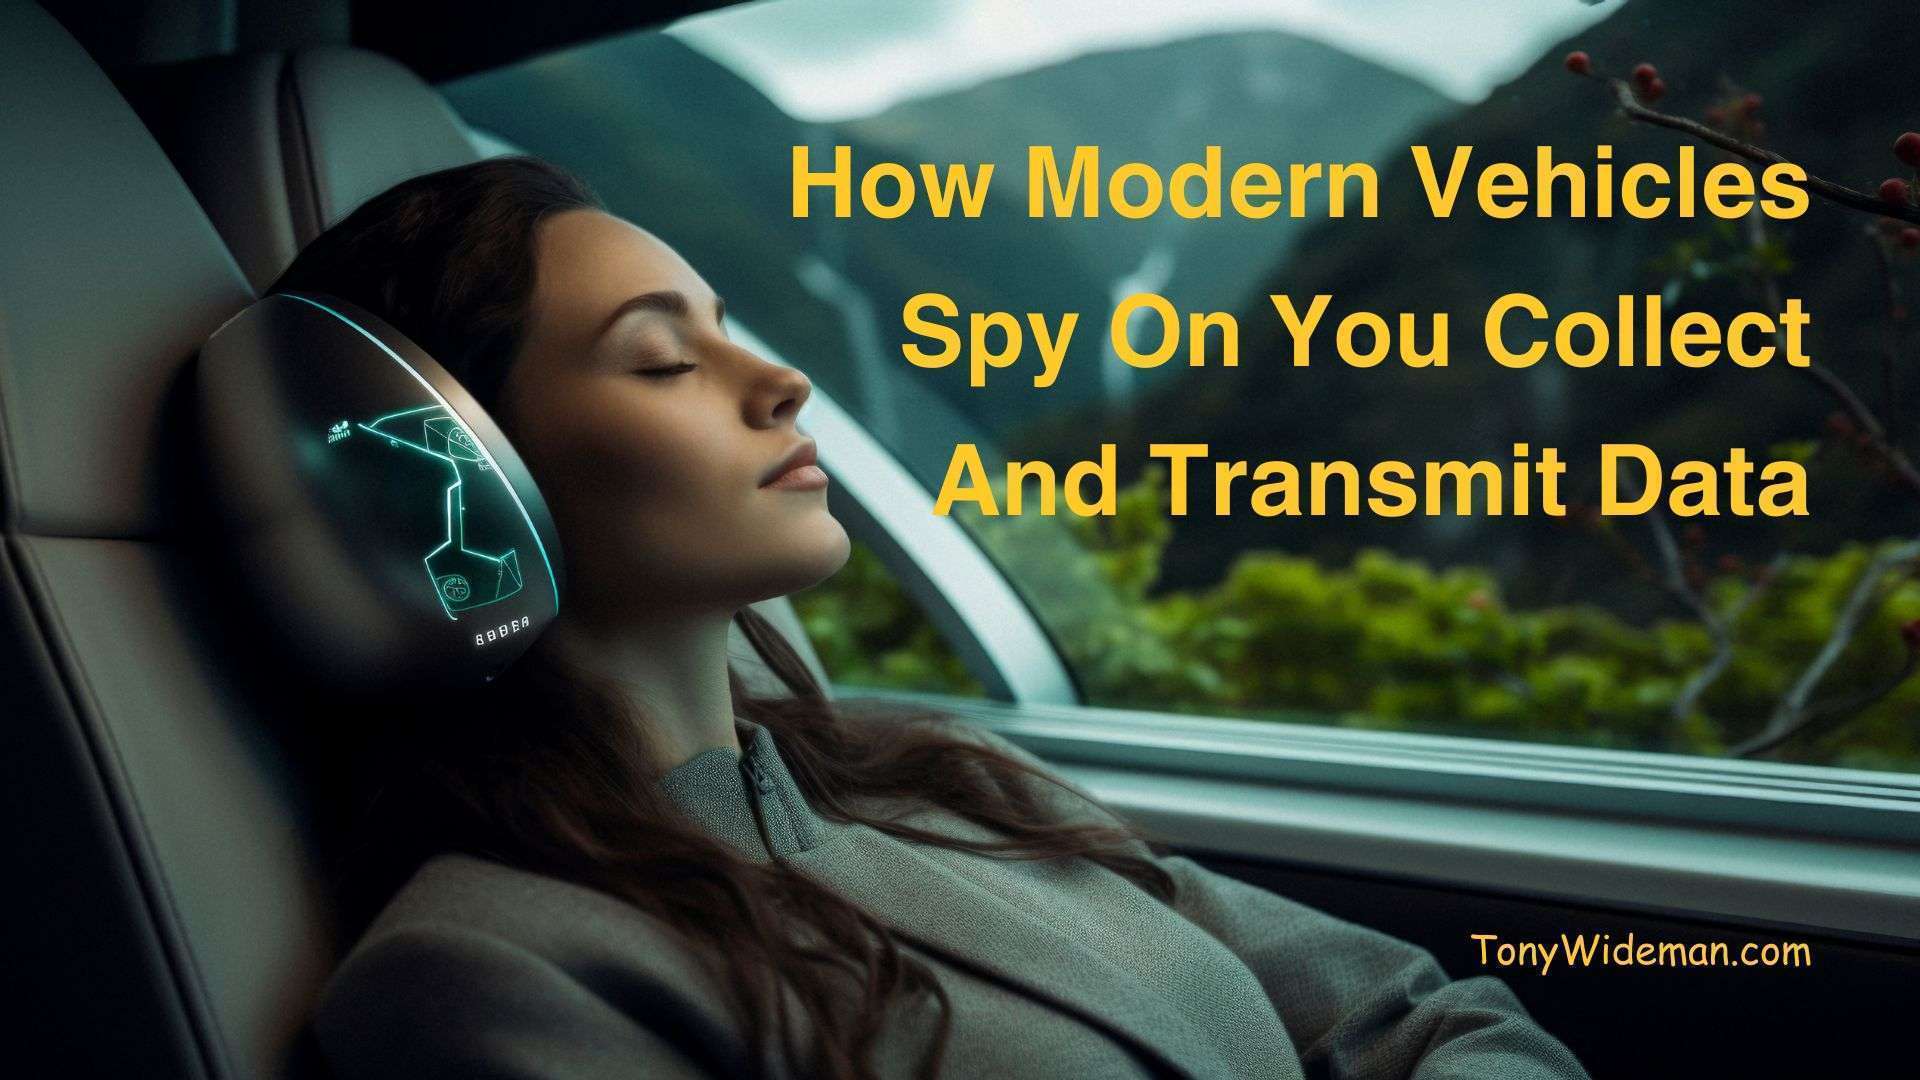 How Modern Vehicles Spy On You Collect And Transmit Data